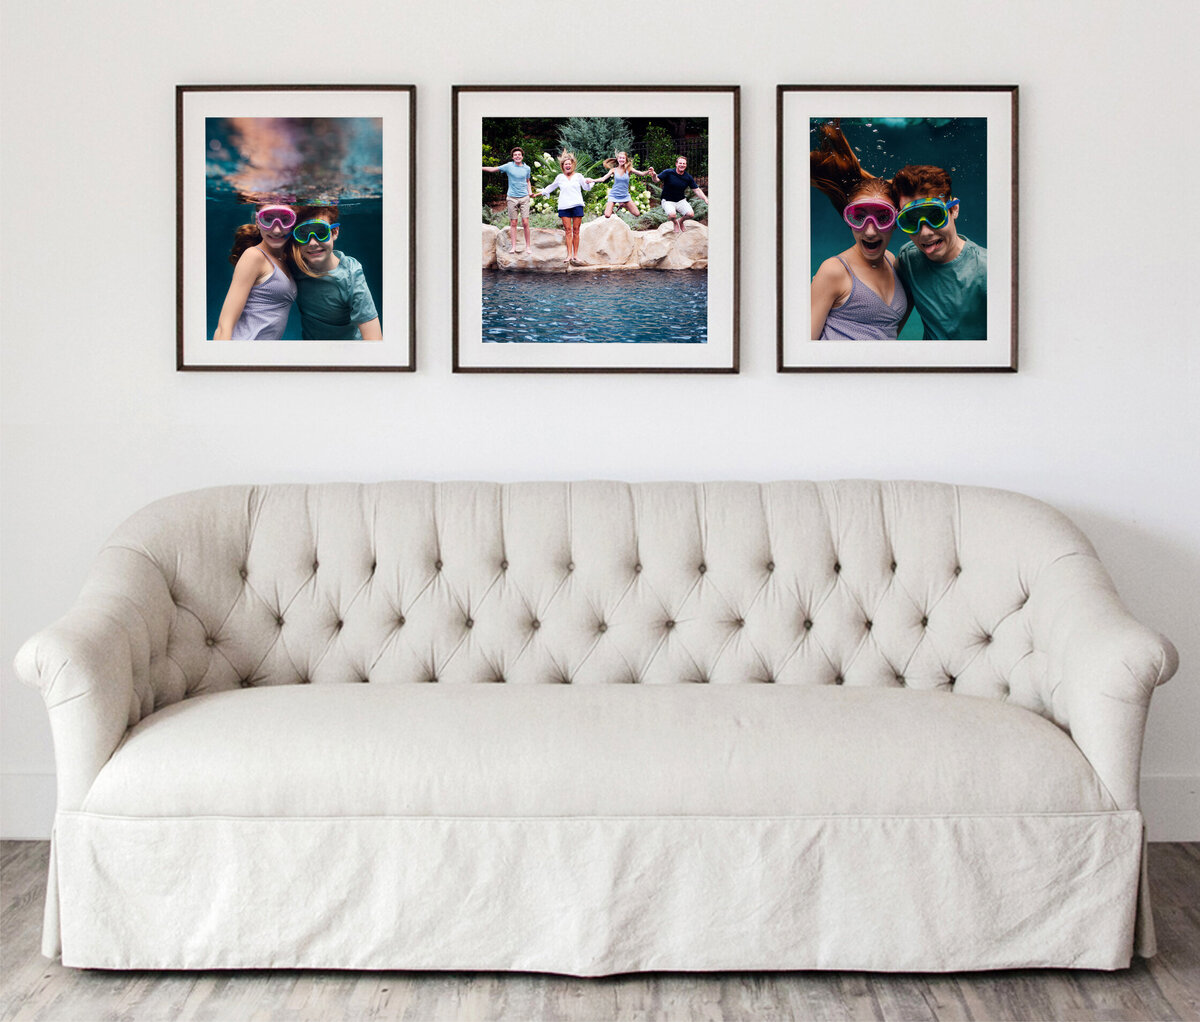 Renee Stengel Photography_Frames_Over_Couch_Family_Underwater_PAGE_15